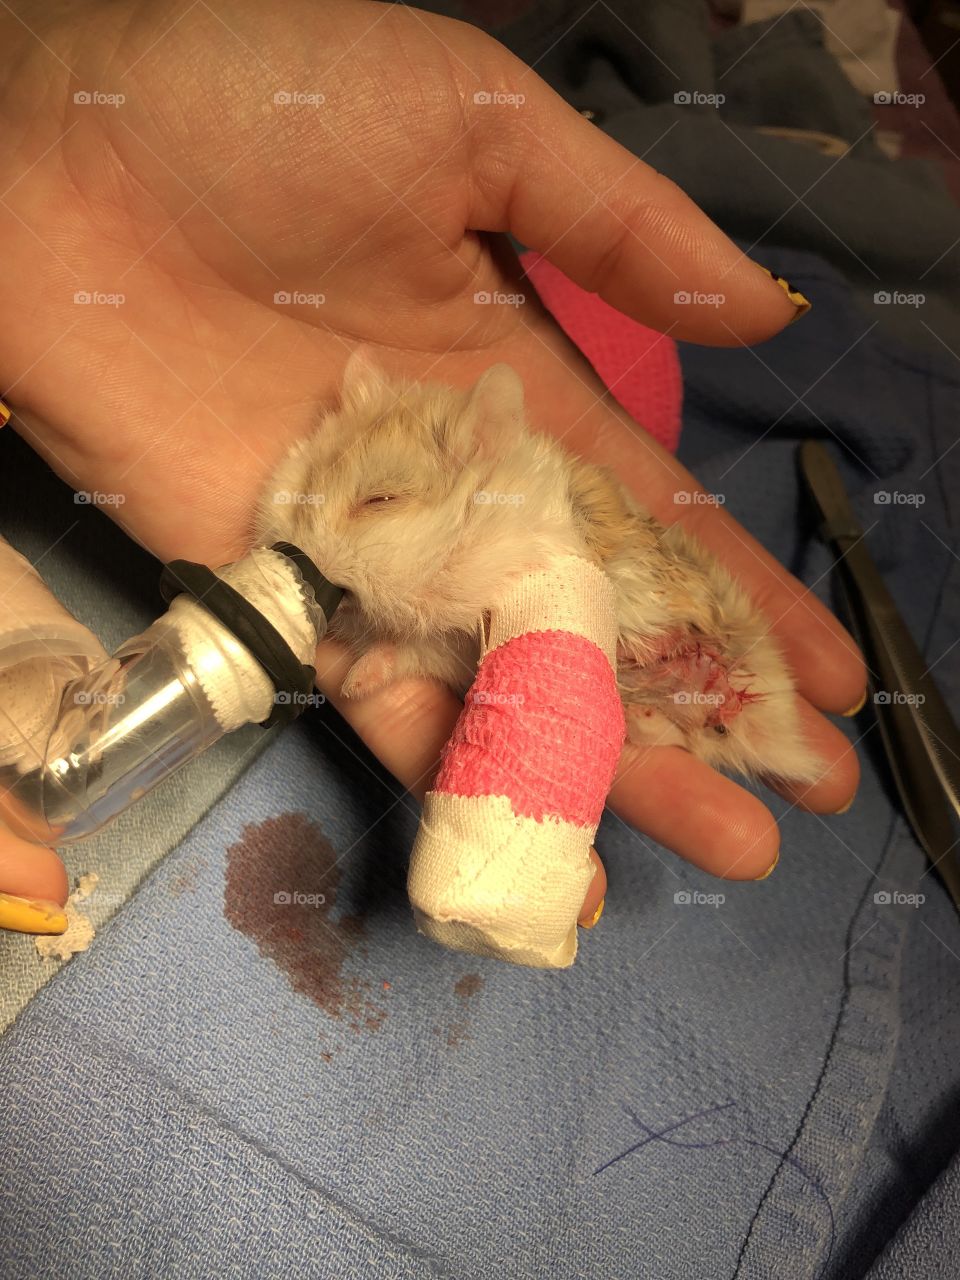 Leg amputation and fracture stabilization on a hampster at work. 